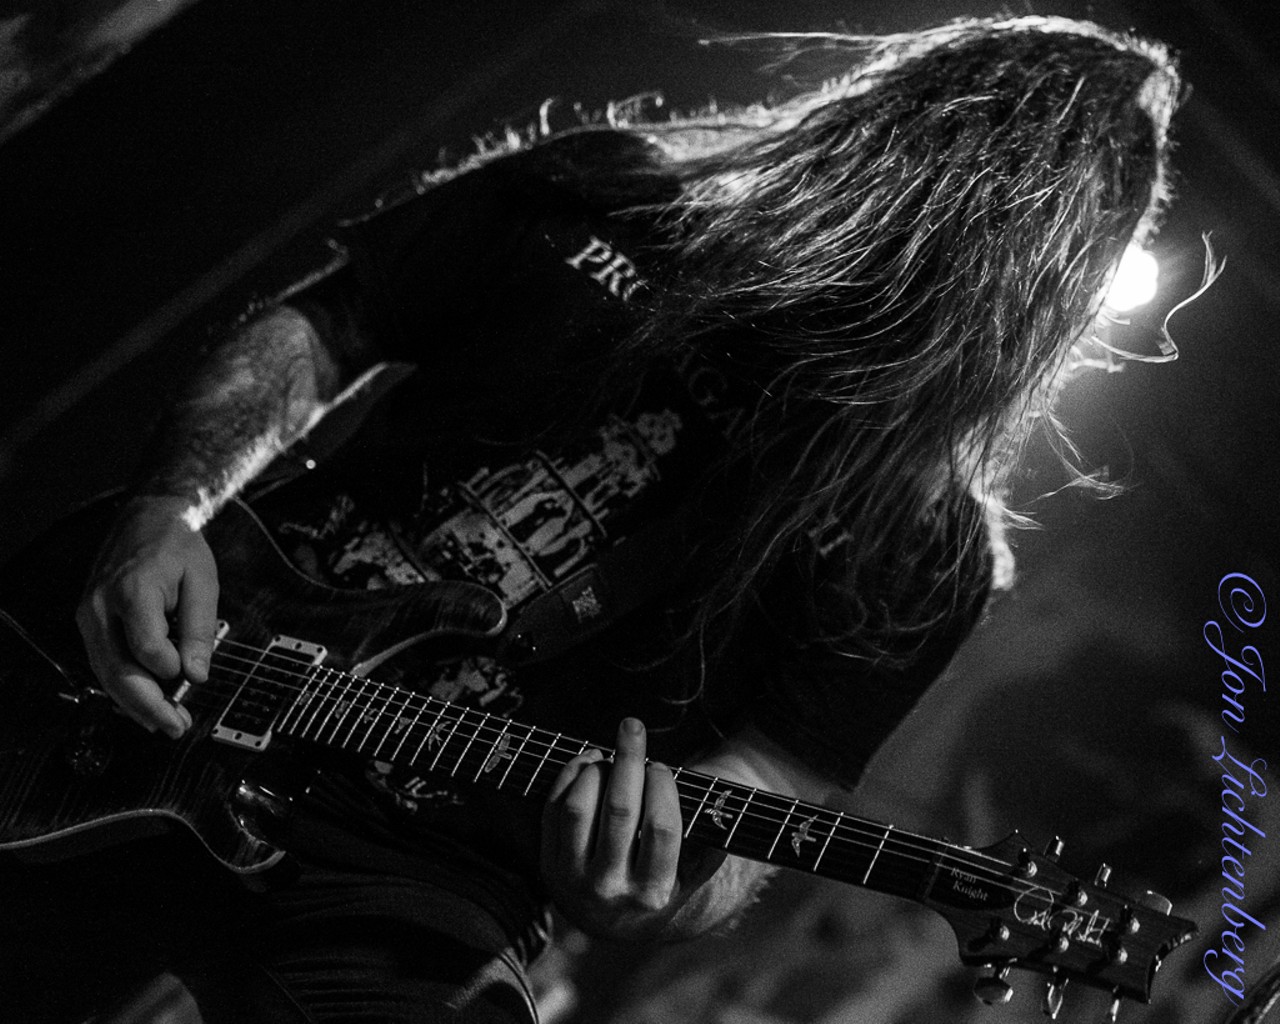 PHOTOS: Black Dahlia Murder and Goatwhore performing at the Agora Theater